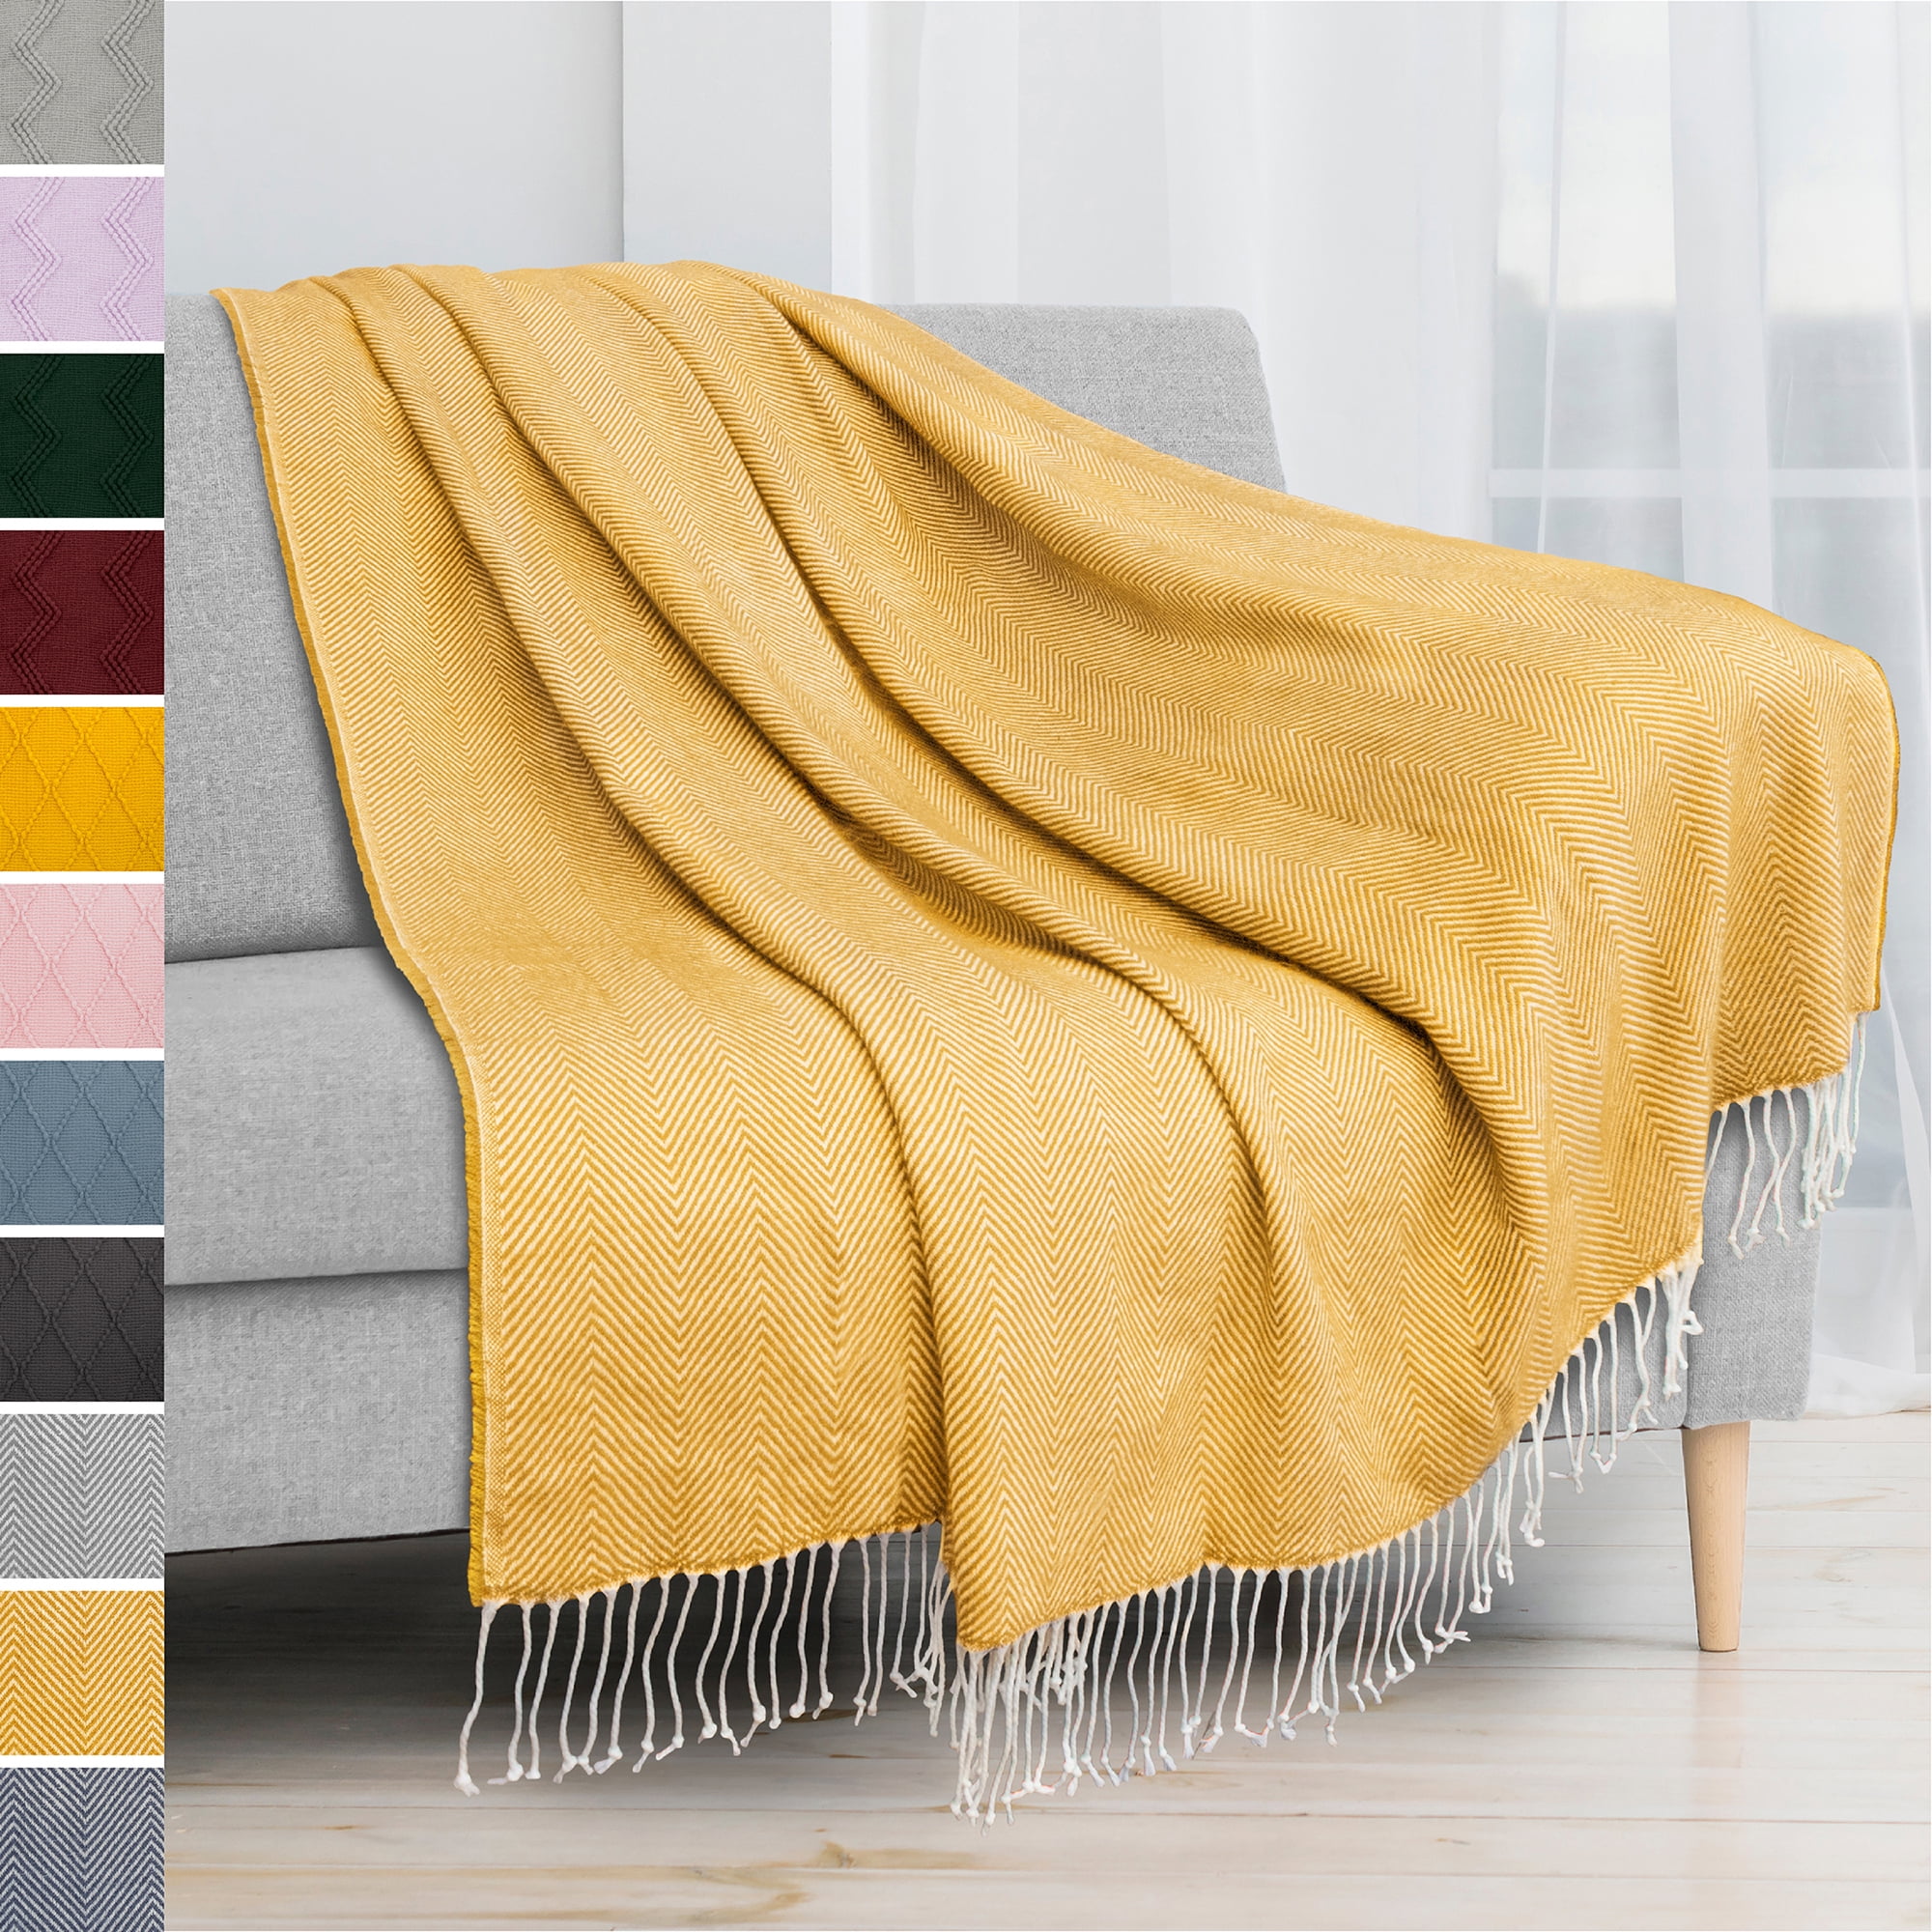 PAVILIA Herringbone Blanket Throw With Fringe Faux Cashmere Knitted Throw With Tassels For Couch Bed Decorative Farmhouse Soft Lightweight Plush Cozy Mustard Yellow